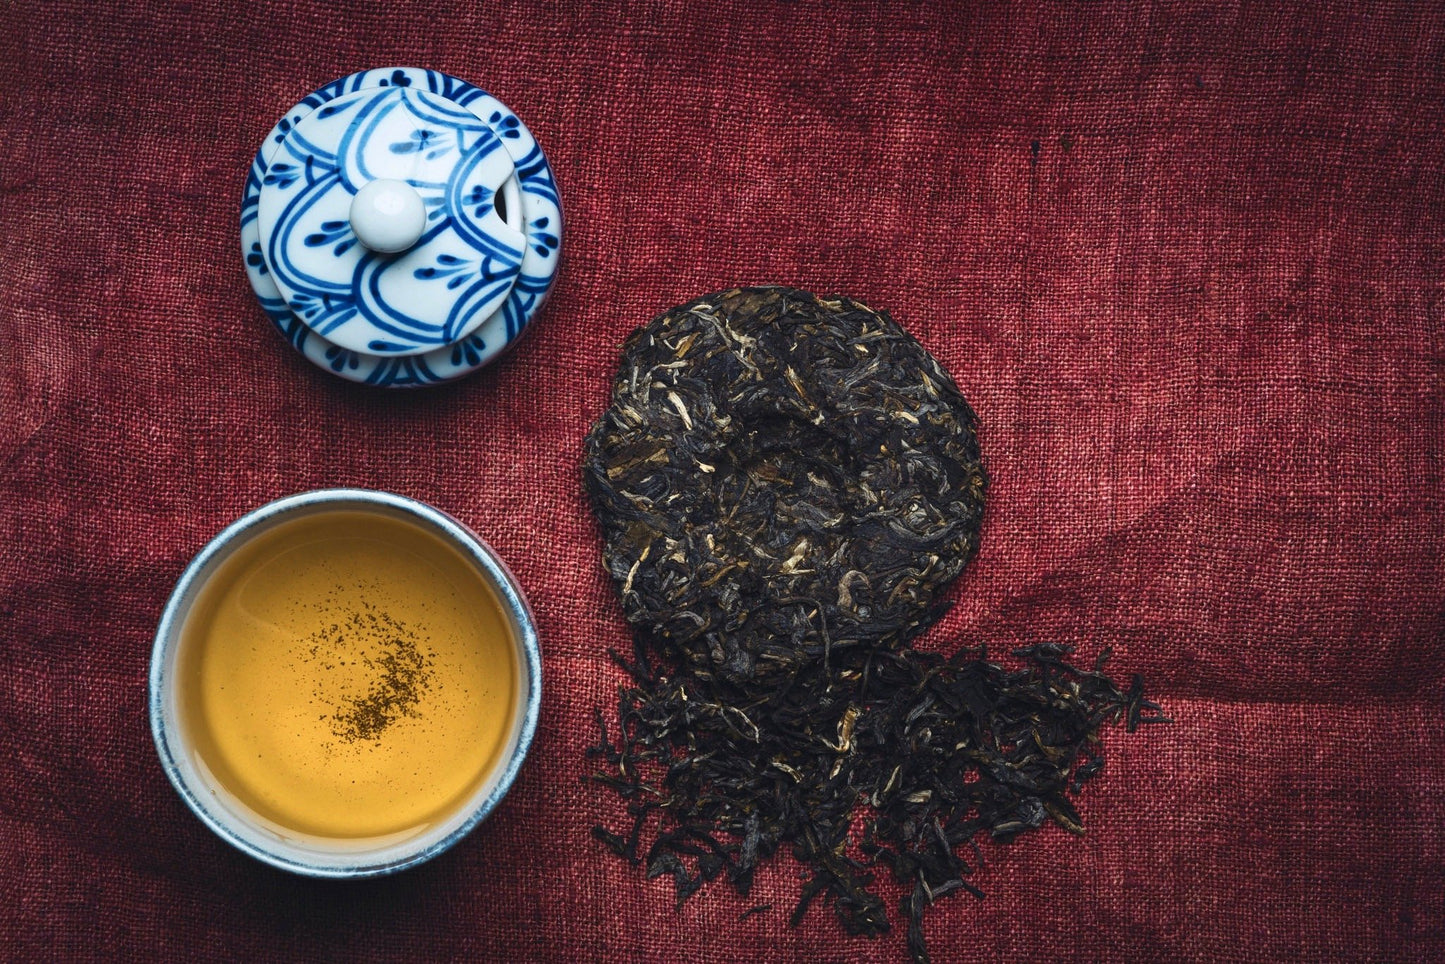 Shop online : 100g teacake - 2019 first grade raw (Sheng) pu-erh teacake from Bulang Moutain. Handcrafted in one of the most bio-diverse regions in Yunnan, Bulang teas are known to be distinctive with a certain bitterness and bold sweetness. Traditionally tone-pressed. Flavour profile: smoked wood, honey